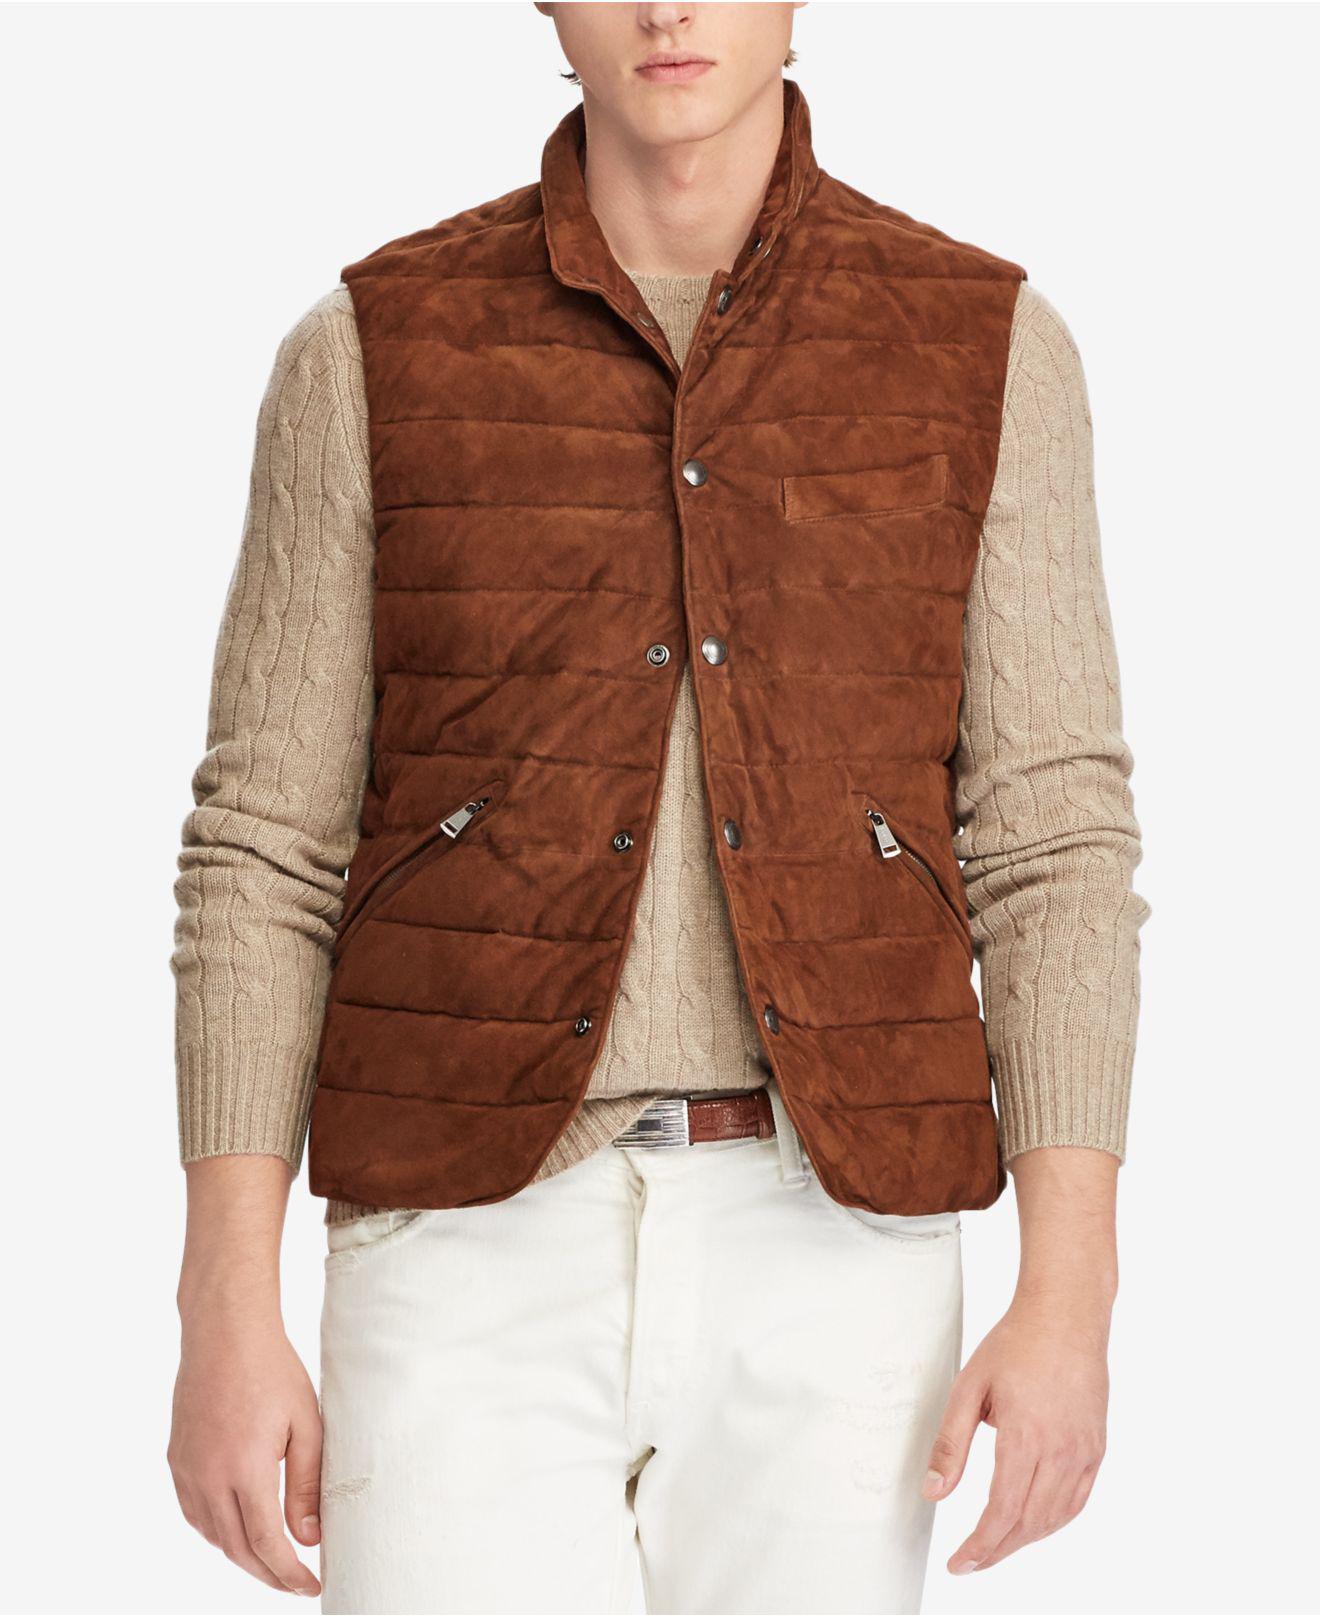 Lyst - Polo Ralph Lauren Quilted Suede Vest in Brown for Men - Save 76%